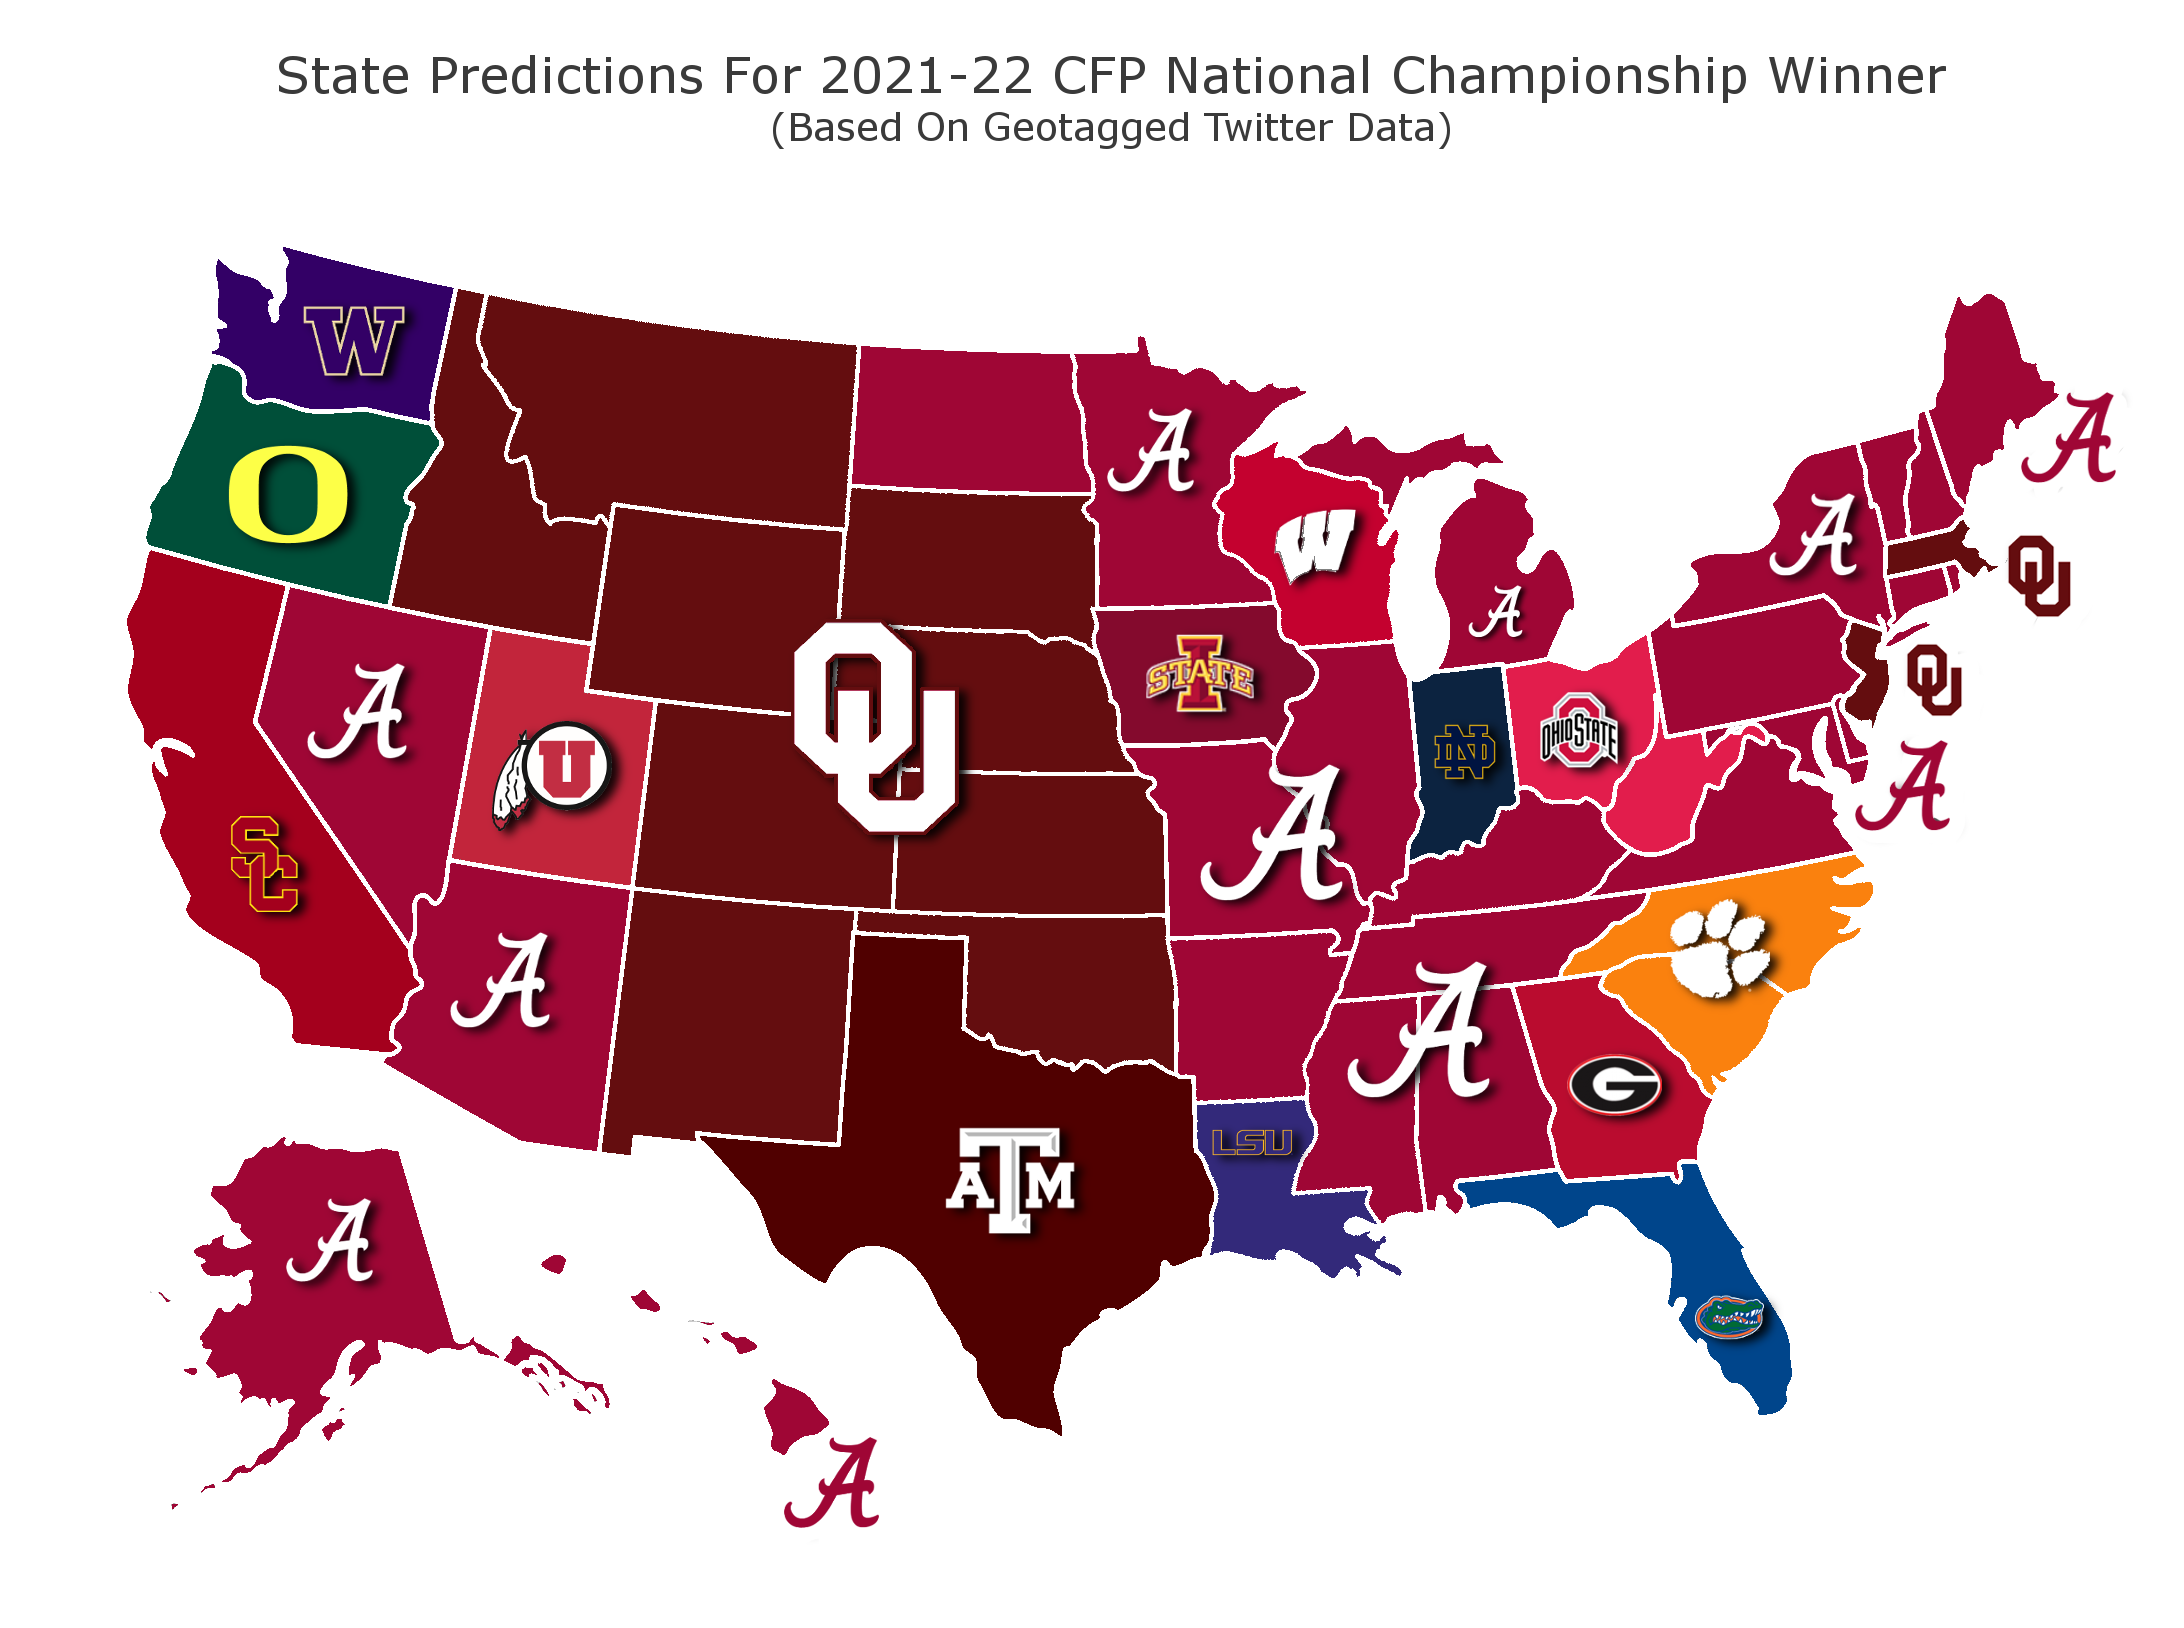 College Football Map (Credit: BetOnline.ag)